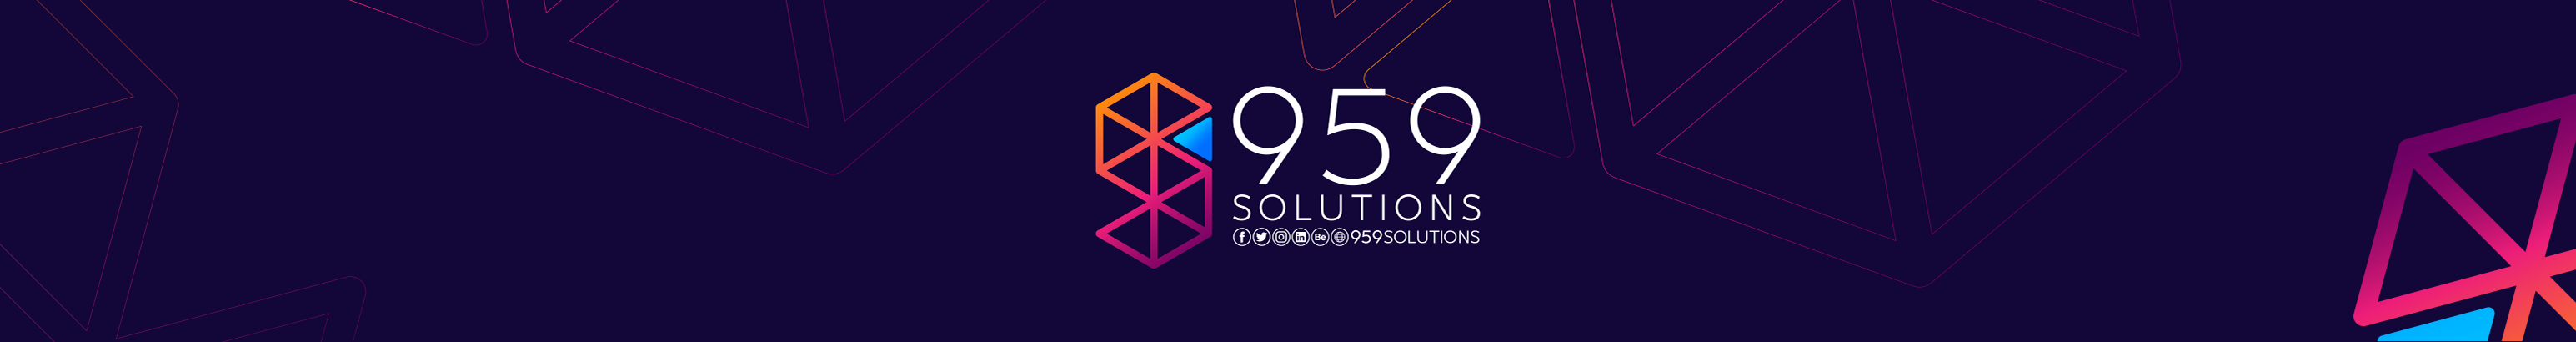 959 Solutions's profile banner